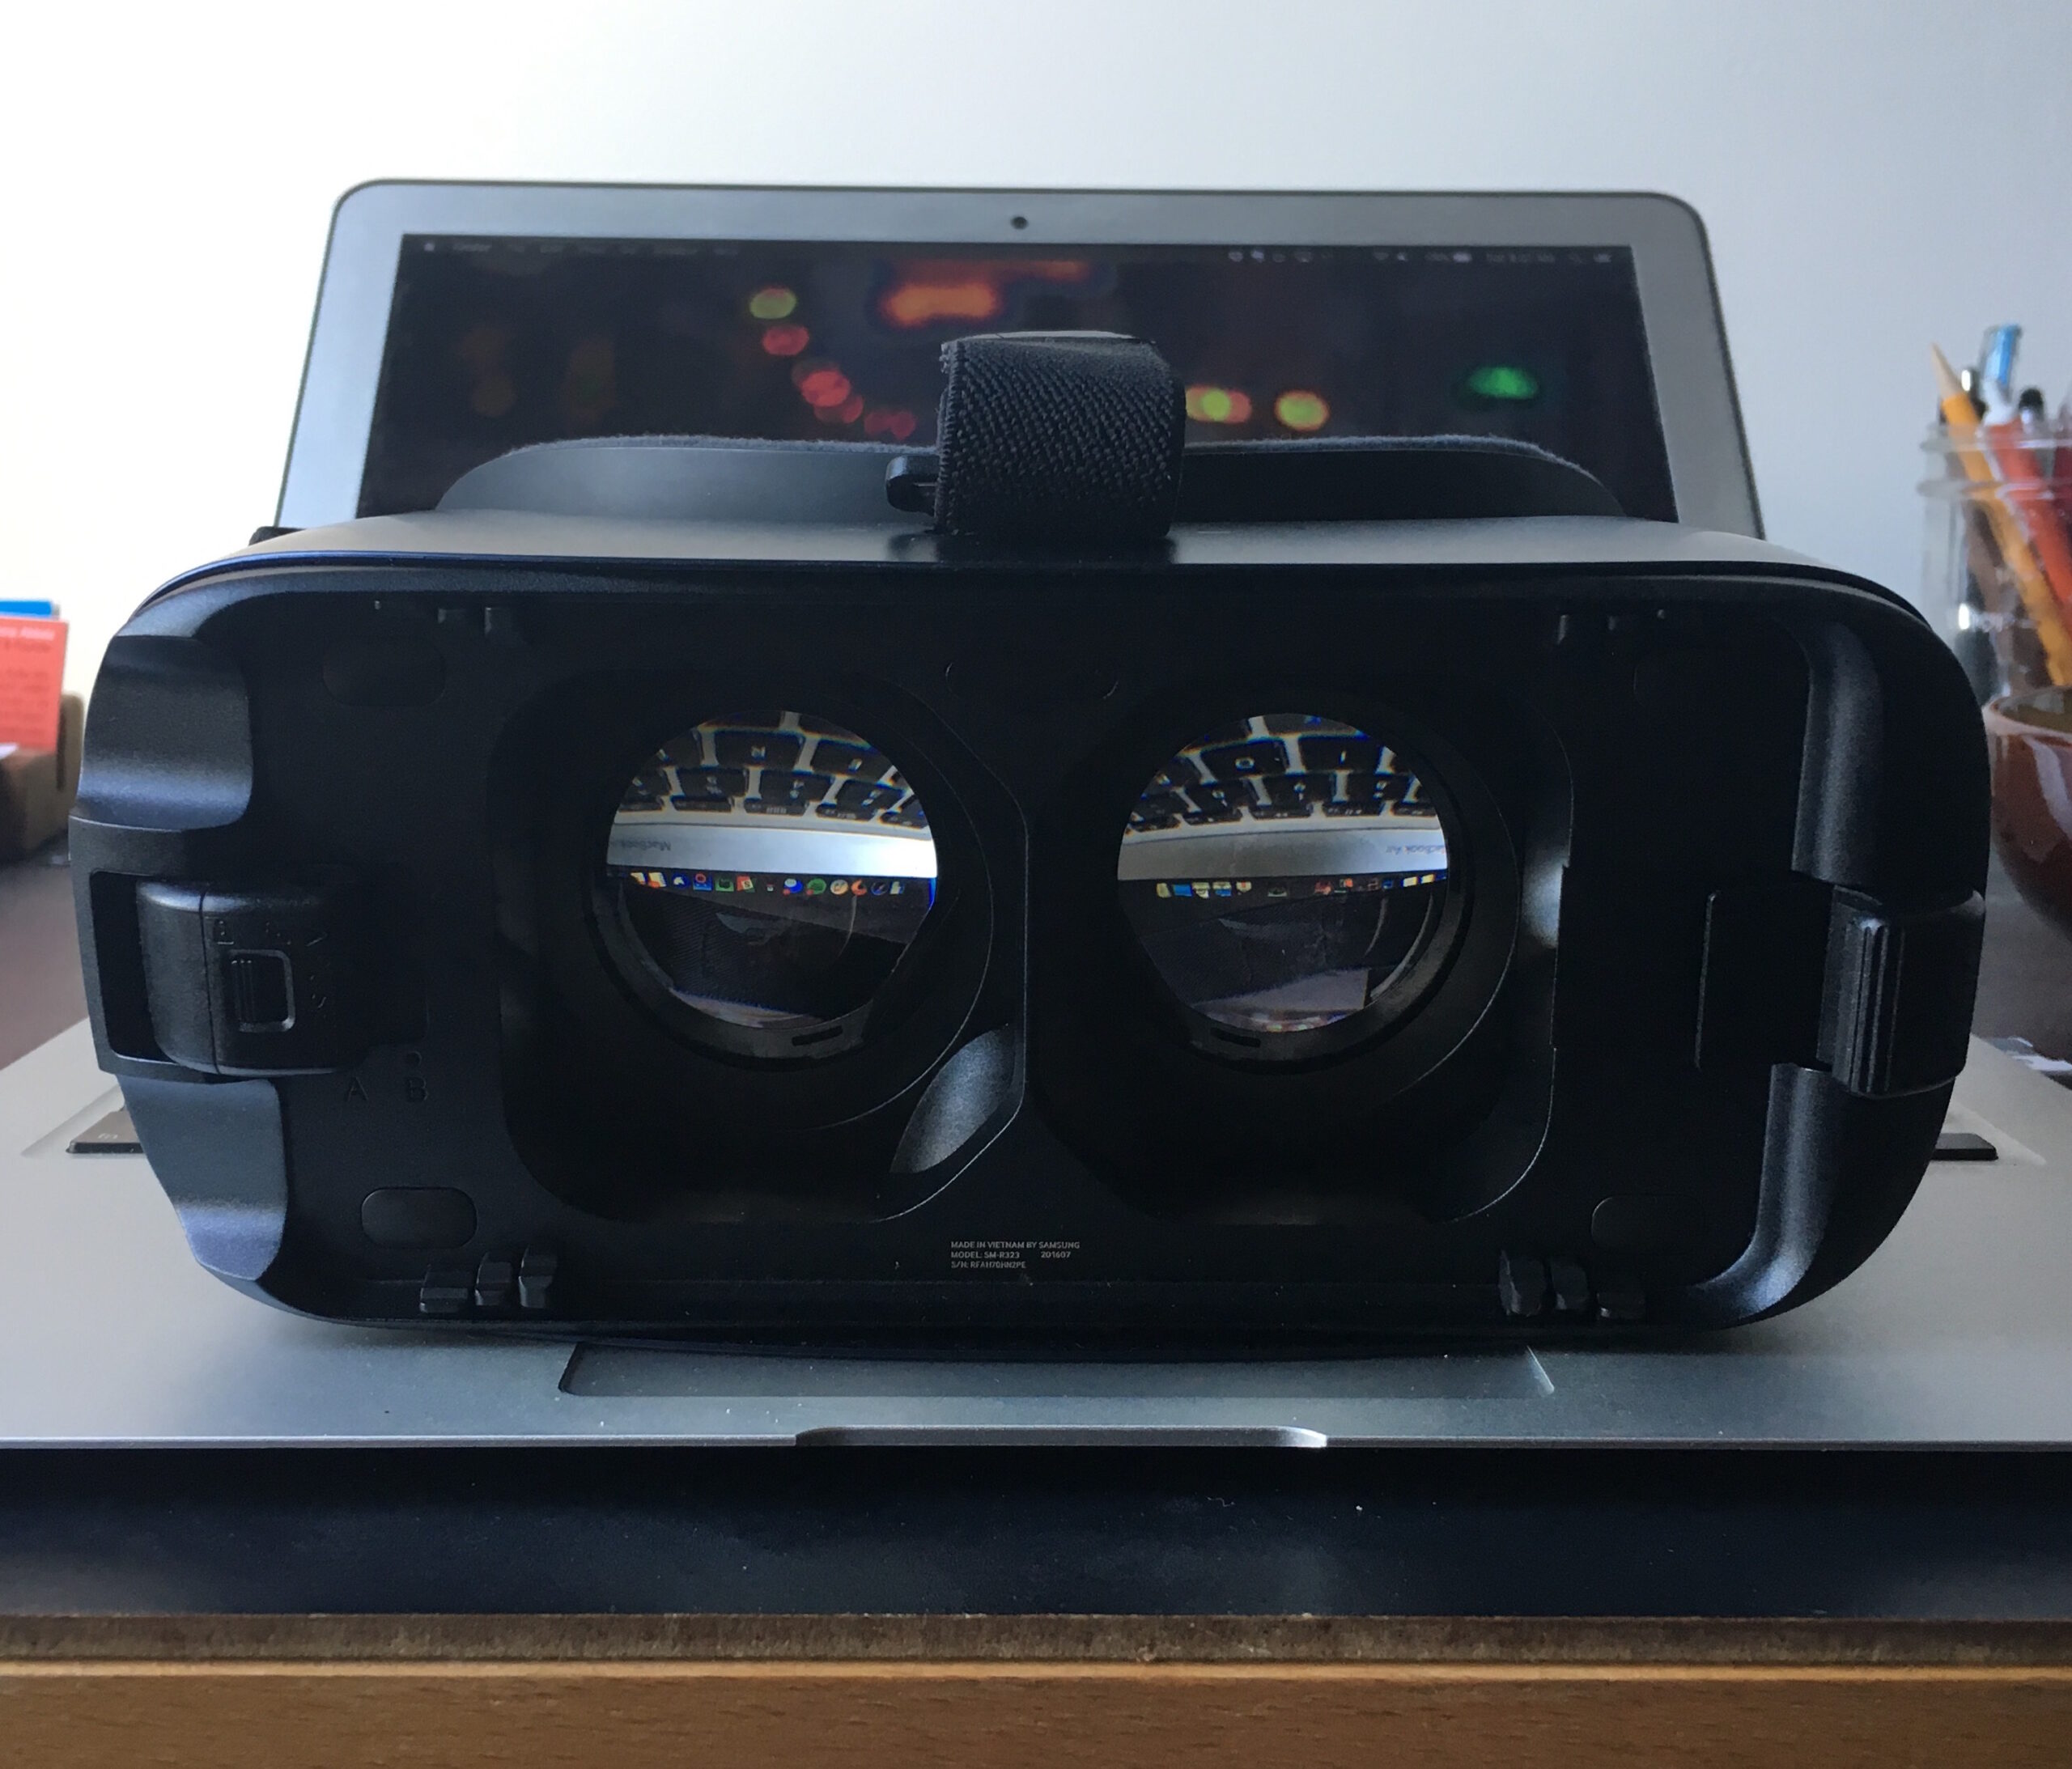 Sinewi hjul detaljeret Here's What We Think About The Samsung Gear VR 2016 Edition